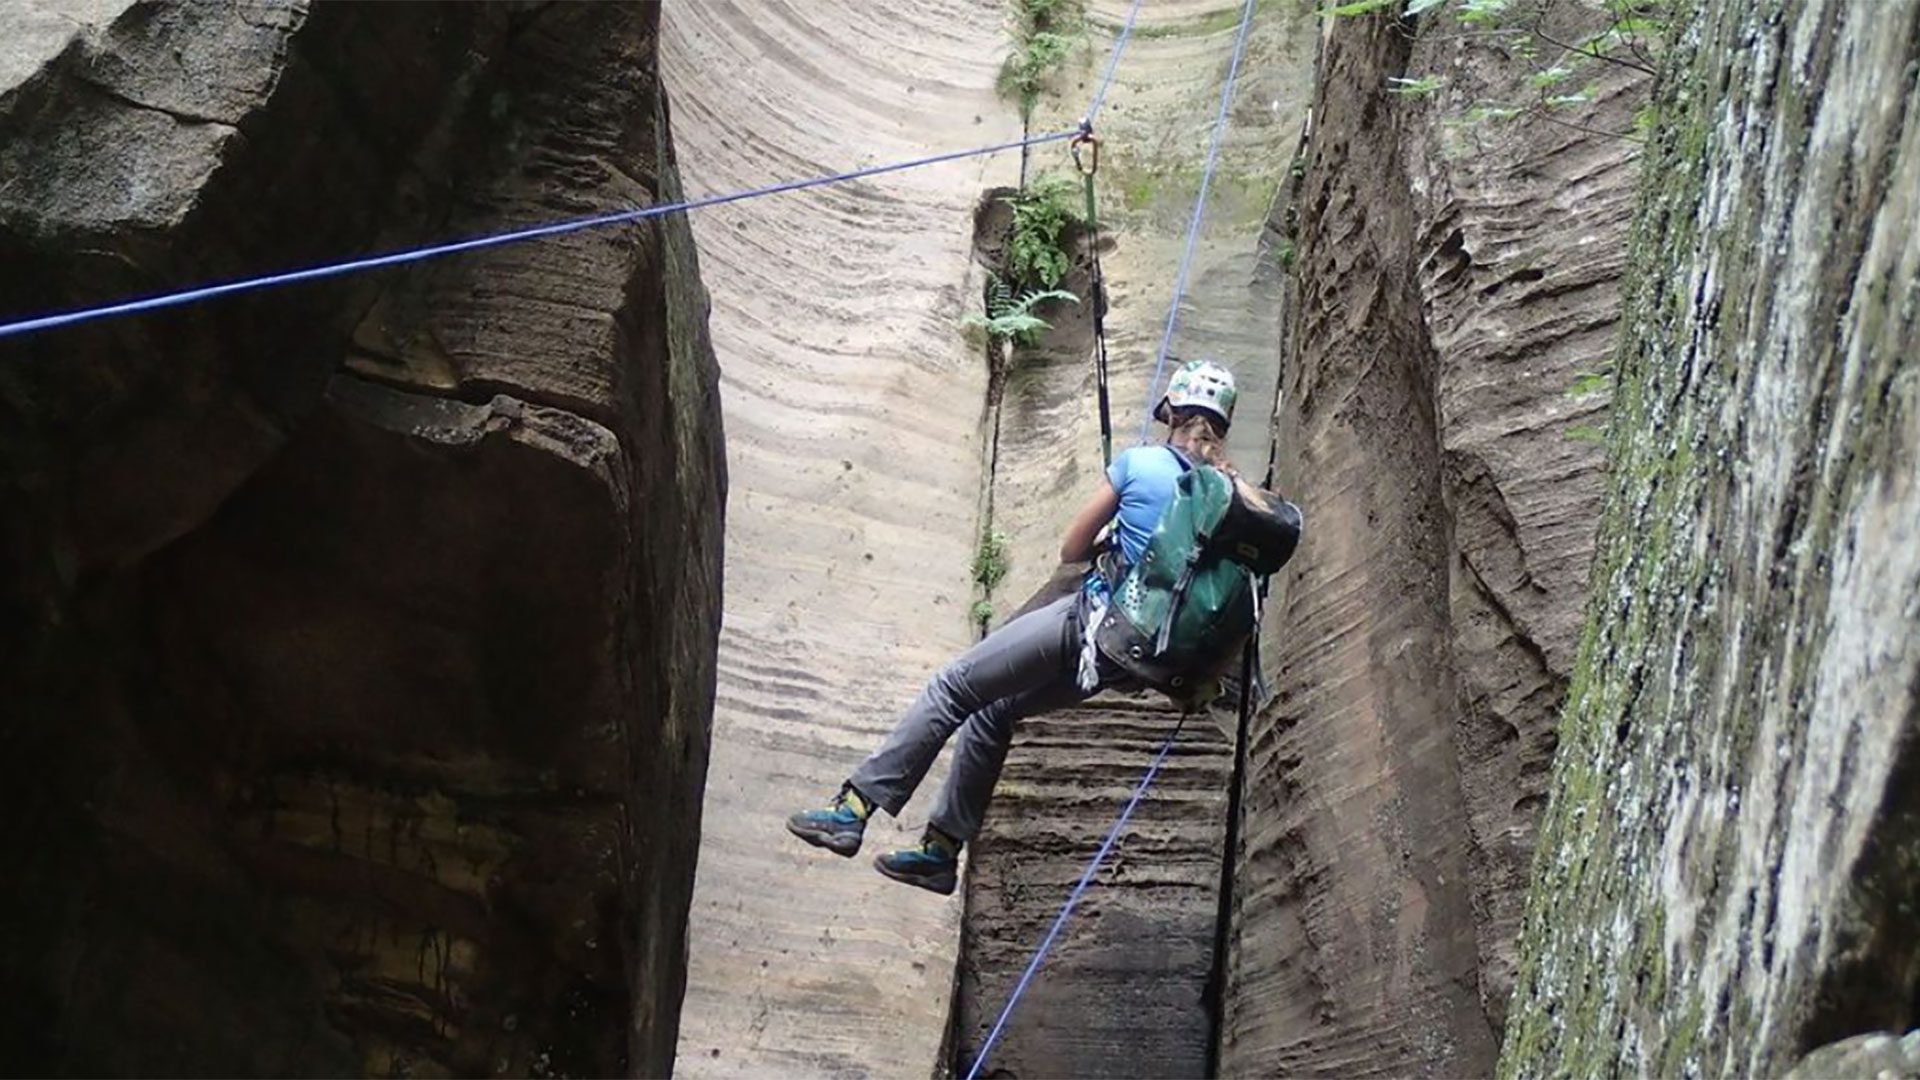 Canyoner practicing and advanced rope technique